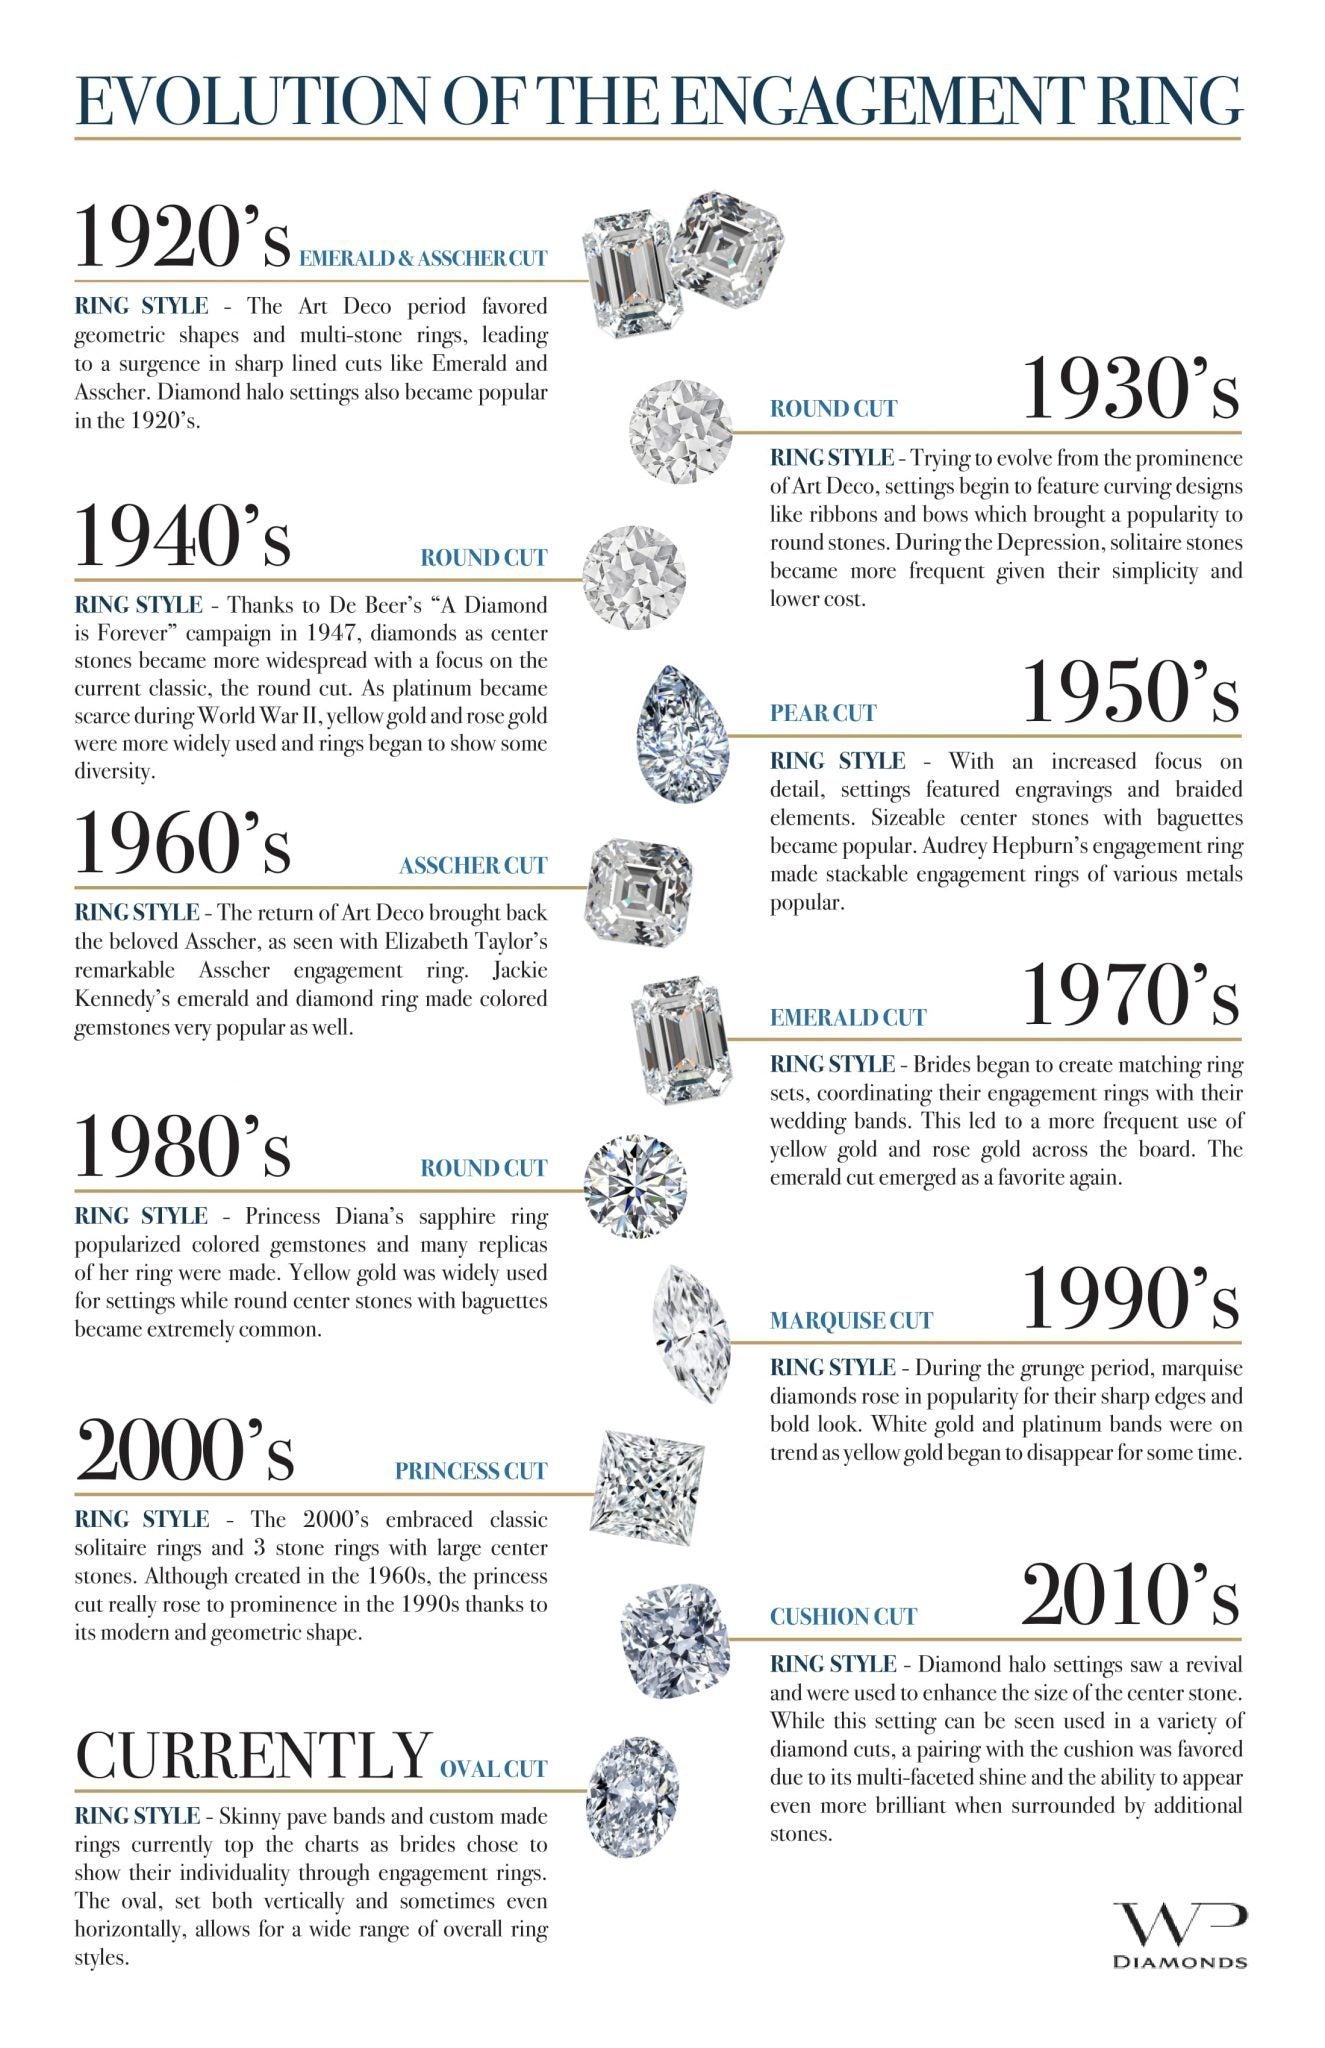 Engagement Ring Trends Across the Decades - Yamron Jewelers